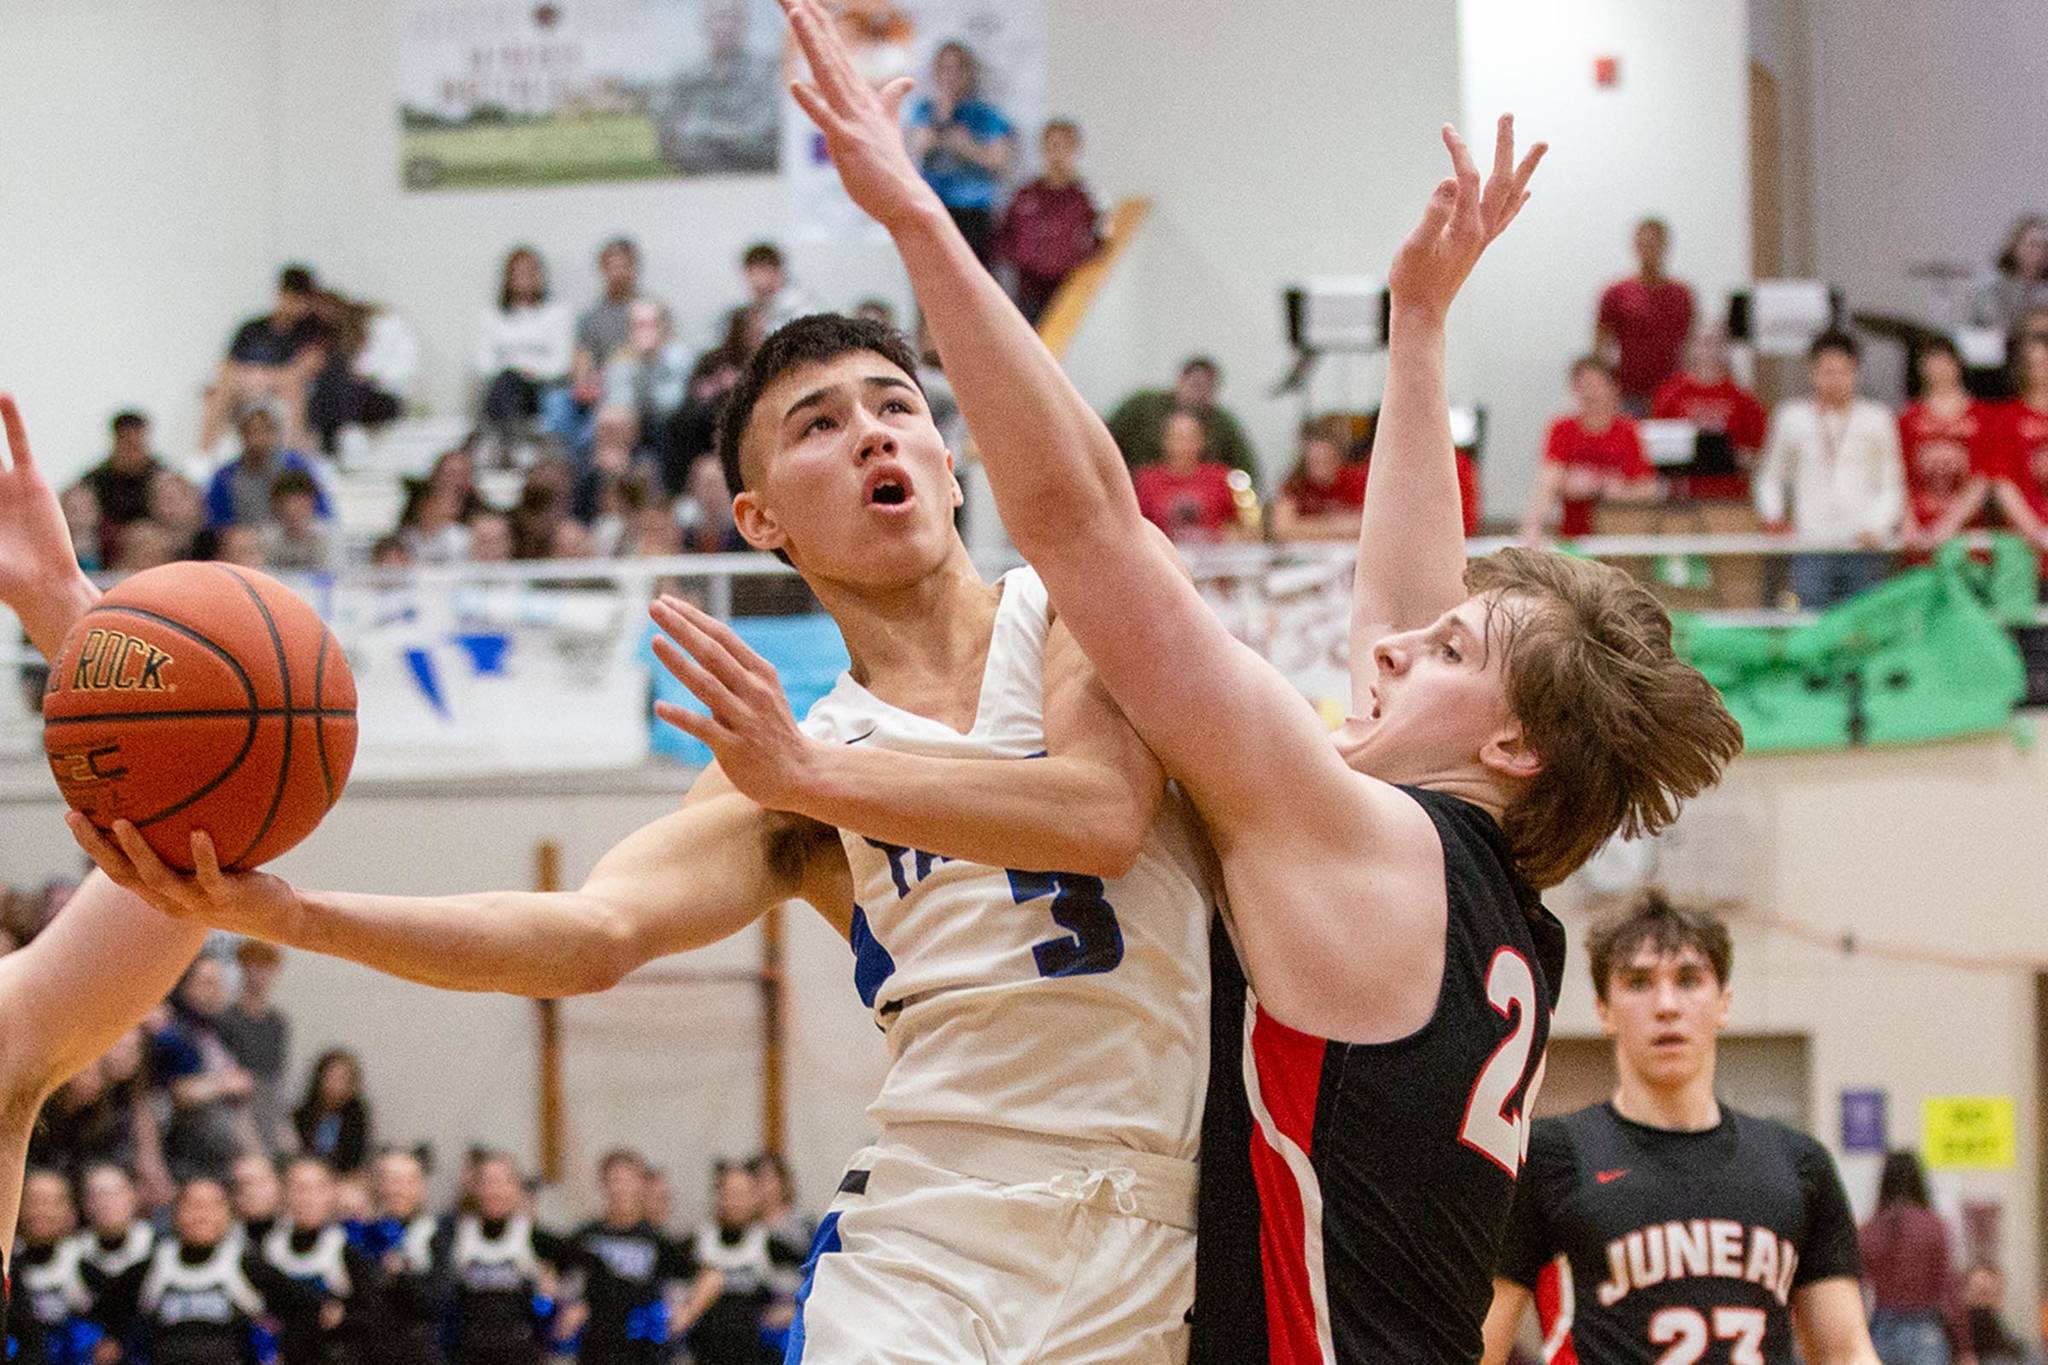 TMHS’ Bryson Echiverri drives toward the hoop and is closely defended by JDHS’ Tad Watson in the Region V 4A championship game. Echiverri was among three Juneau basketball players to earn all-state honors. (Courtesy Photo | Heather Holt)